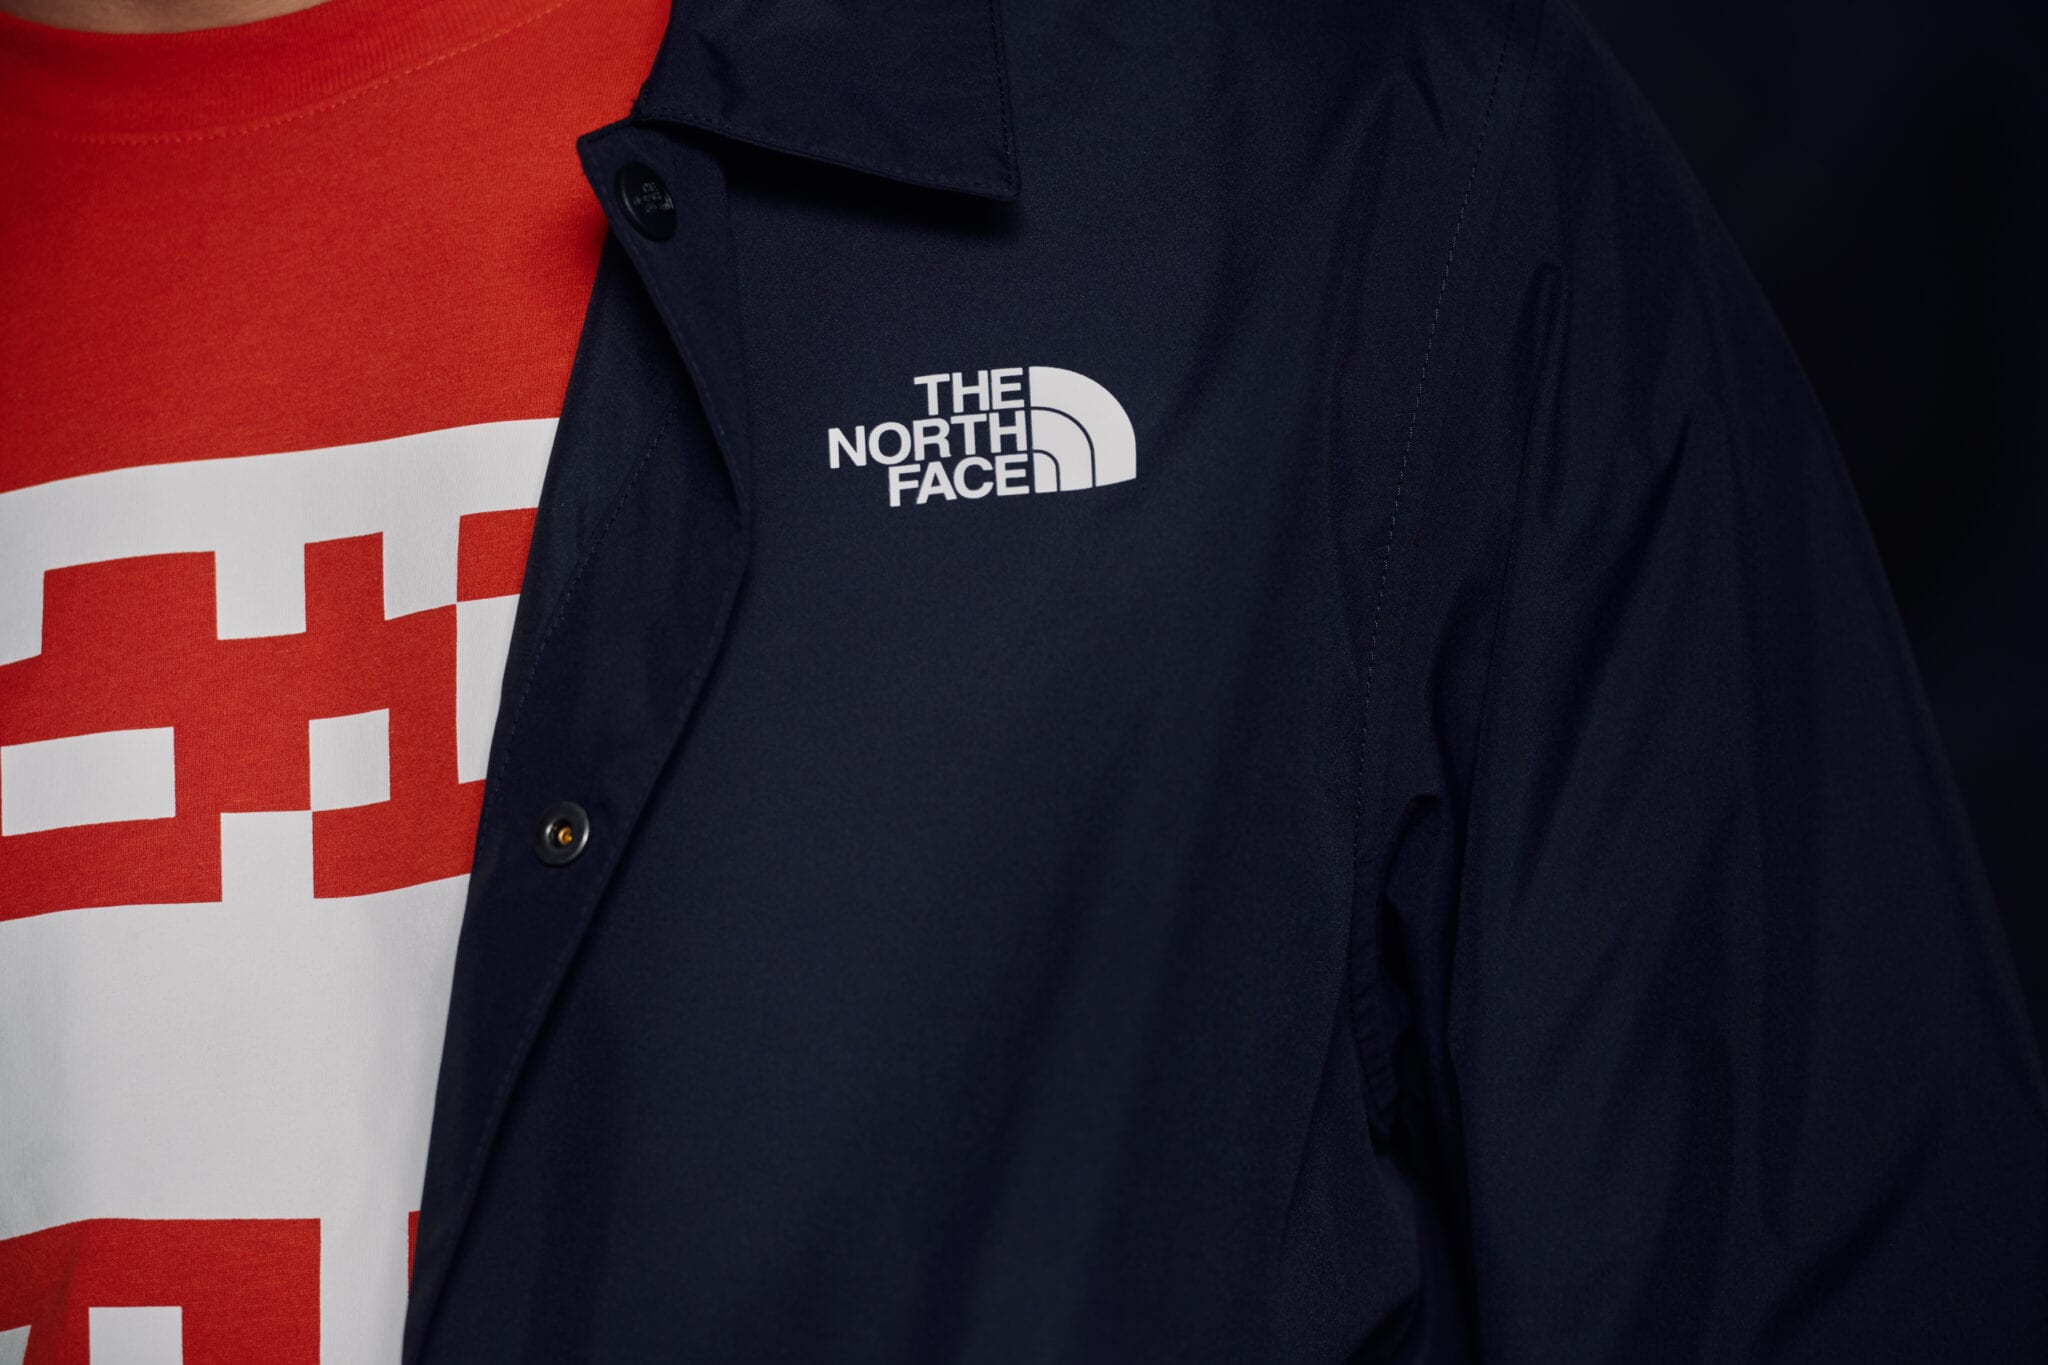 The North Face International Collection header